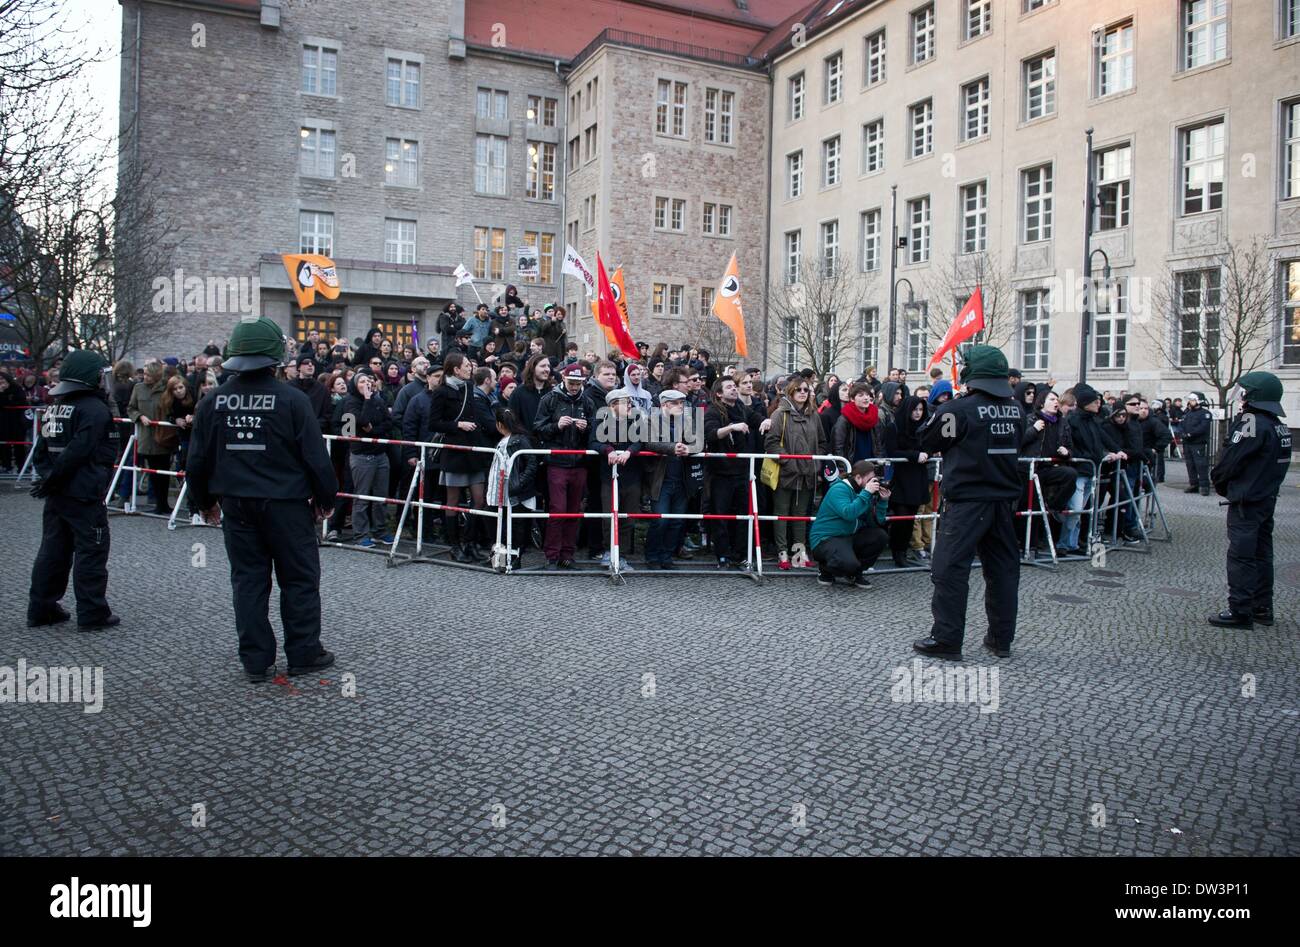 Berlin, Germany. 26th Feb, 2014. Police stand in front of counterdemonstrators during an NPD demonstration in Berlin, Germany, 26 February 2014. The NPD was protesting against the controverstial Dresden action by Pirate Party politician Anne Helm. Helm took part in a Femen protest under the motto 'Thanks Bomber Harris.' Photo: DANIEL NAUPOLD/dpa/Alamy Live News Stock Photo